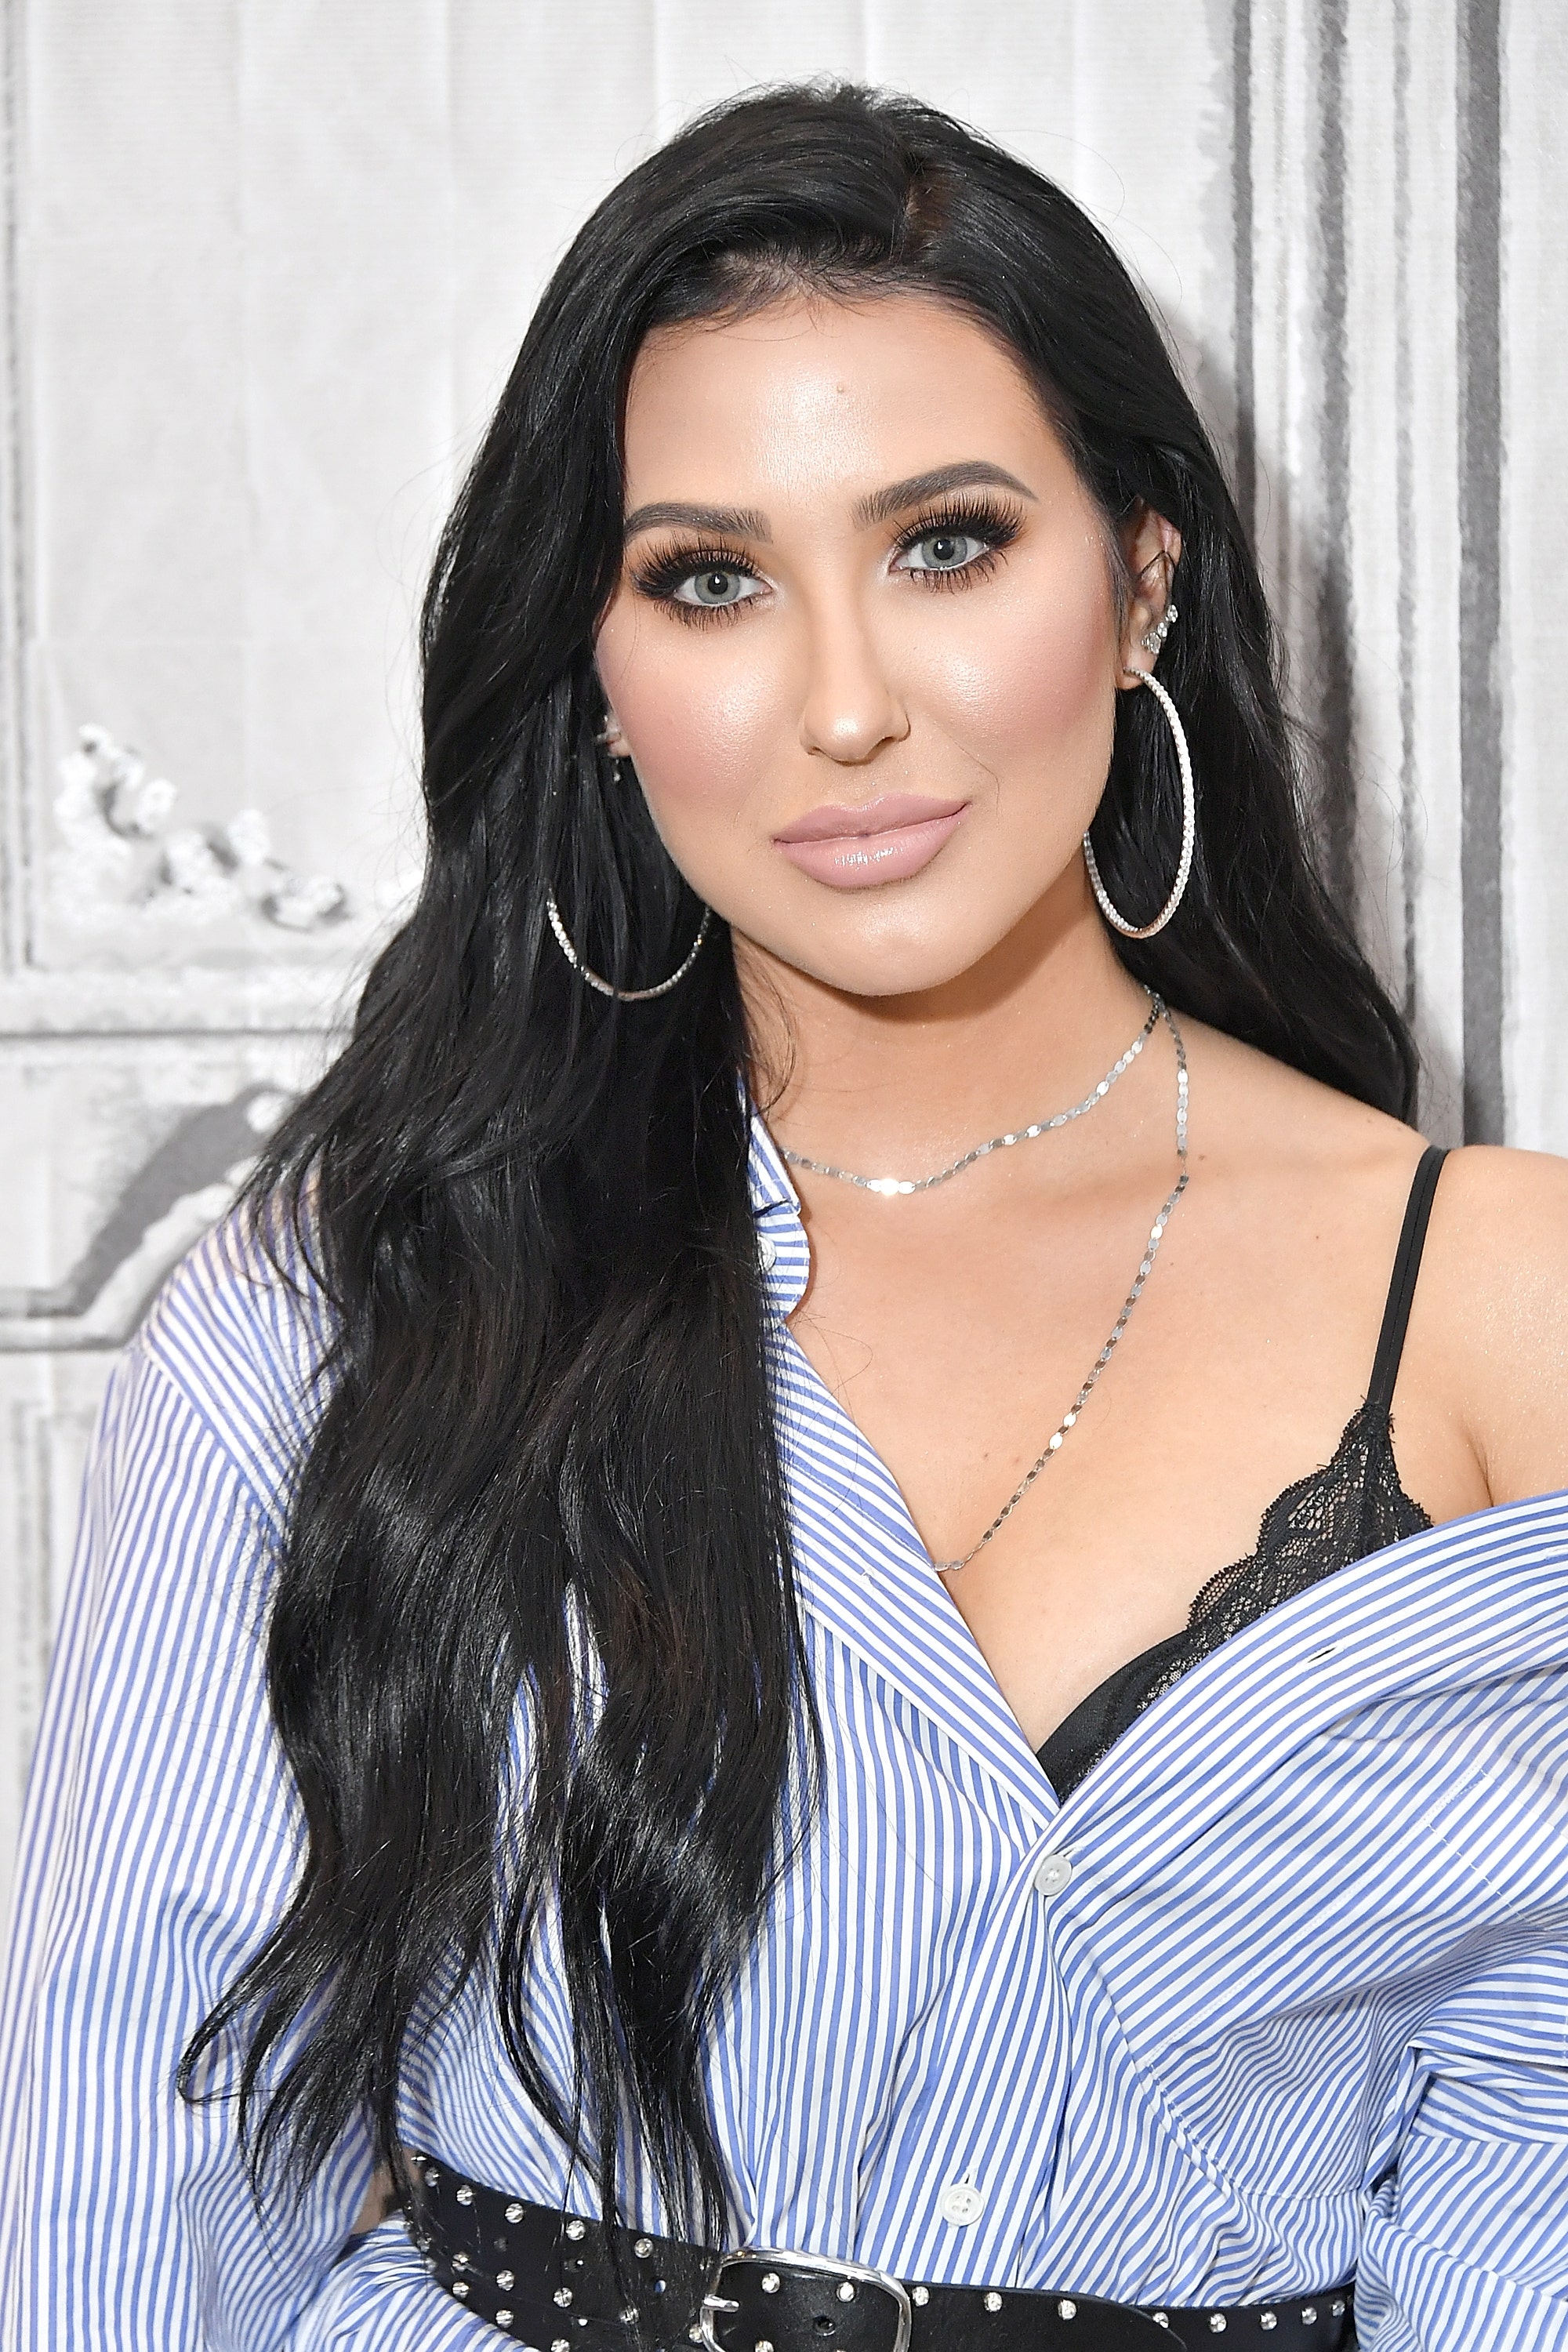 Beauty Blogger Jaclyn Hill Responds To Hairy Lumpy Lipstick